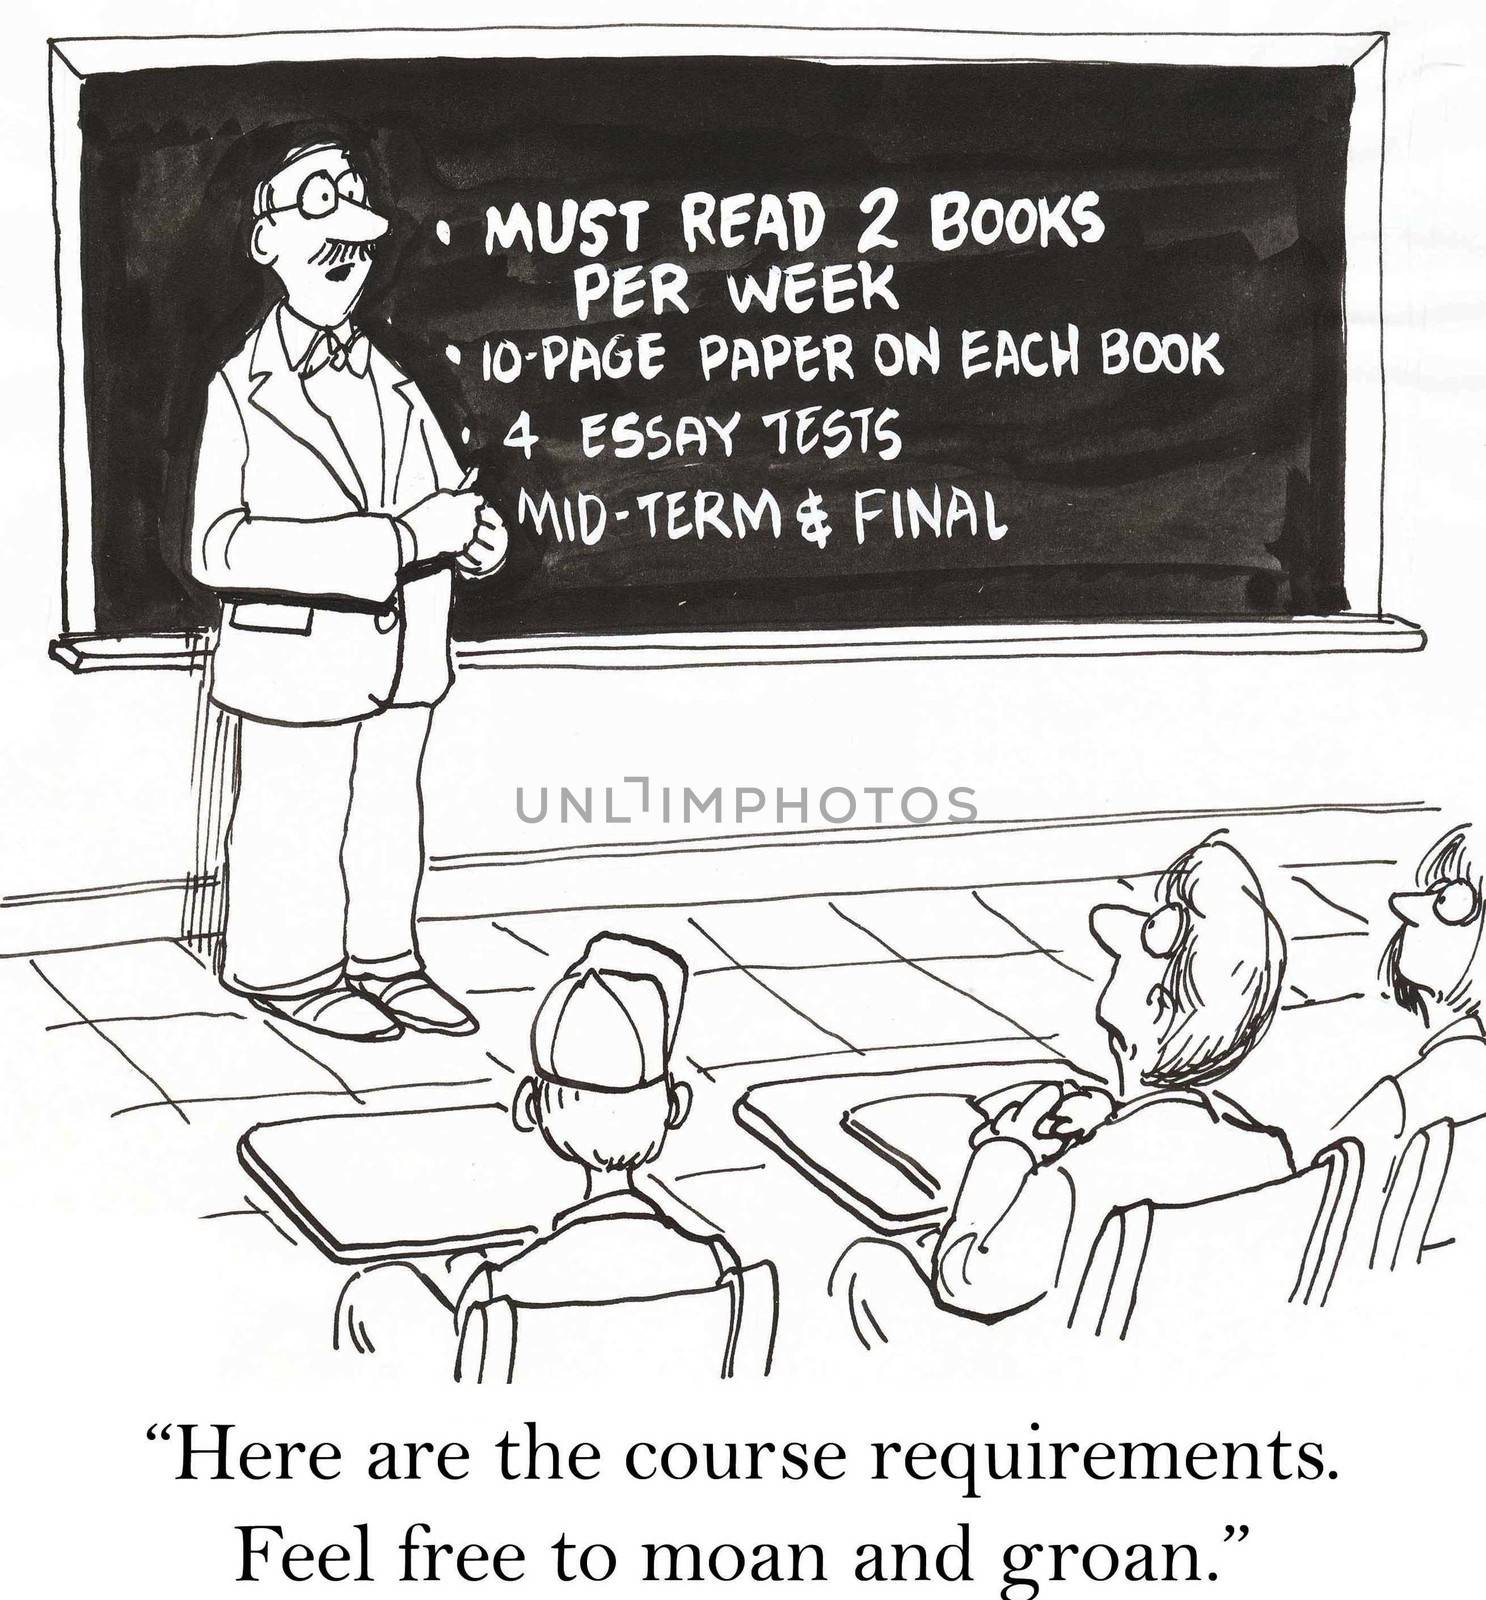 "Here are the course requirements.  Feel free to moan and groan."